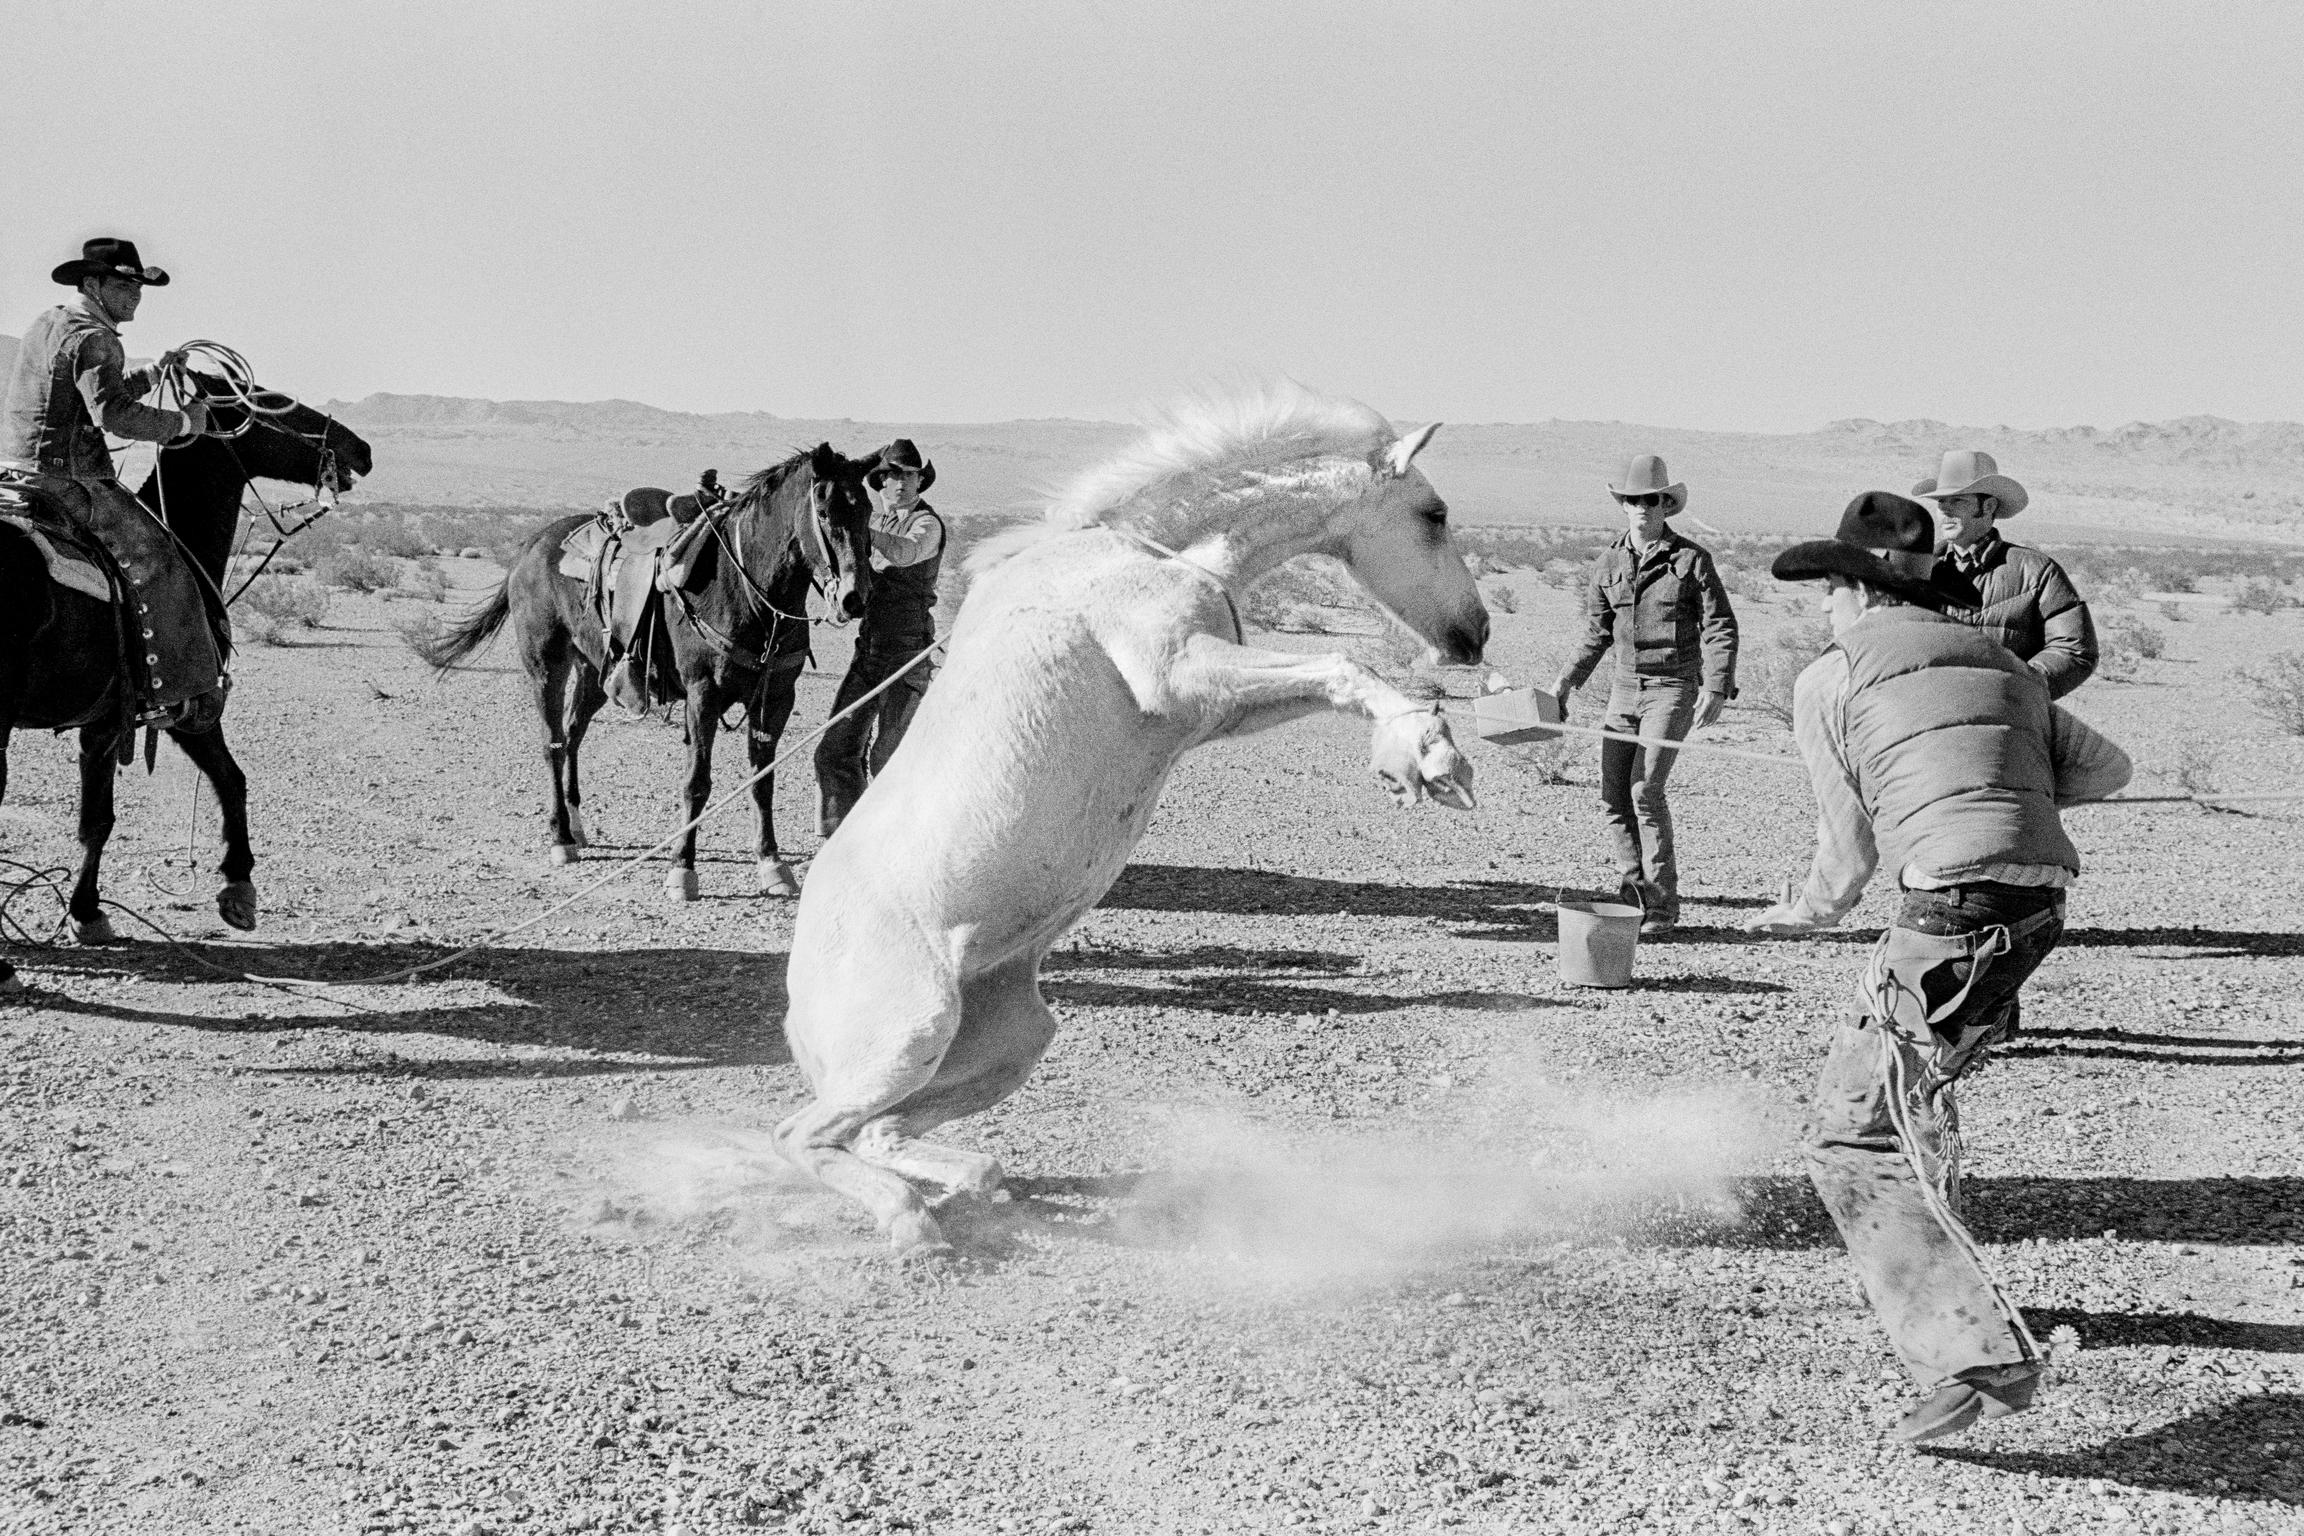 The roundup of the last wild horses in the desert of Arizona. The wild horse is captured with the traditional lasso and roping by working cowboys